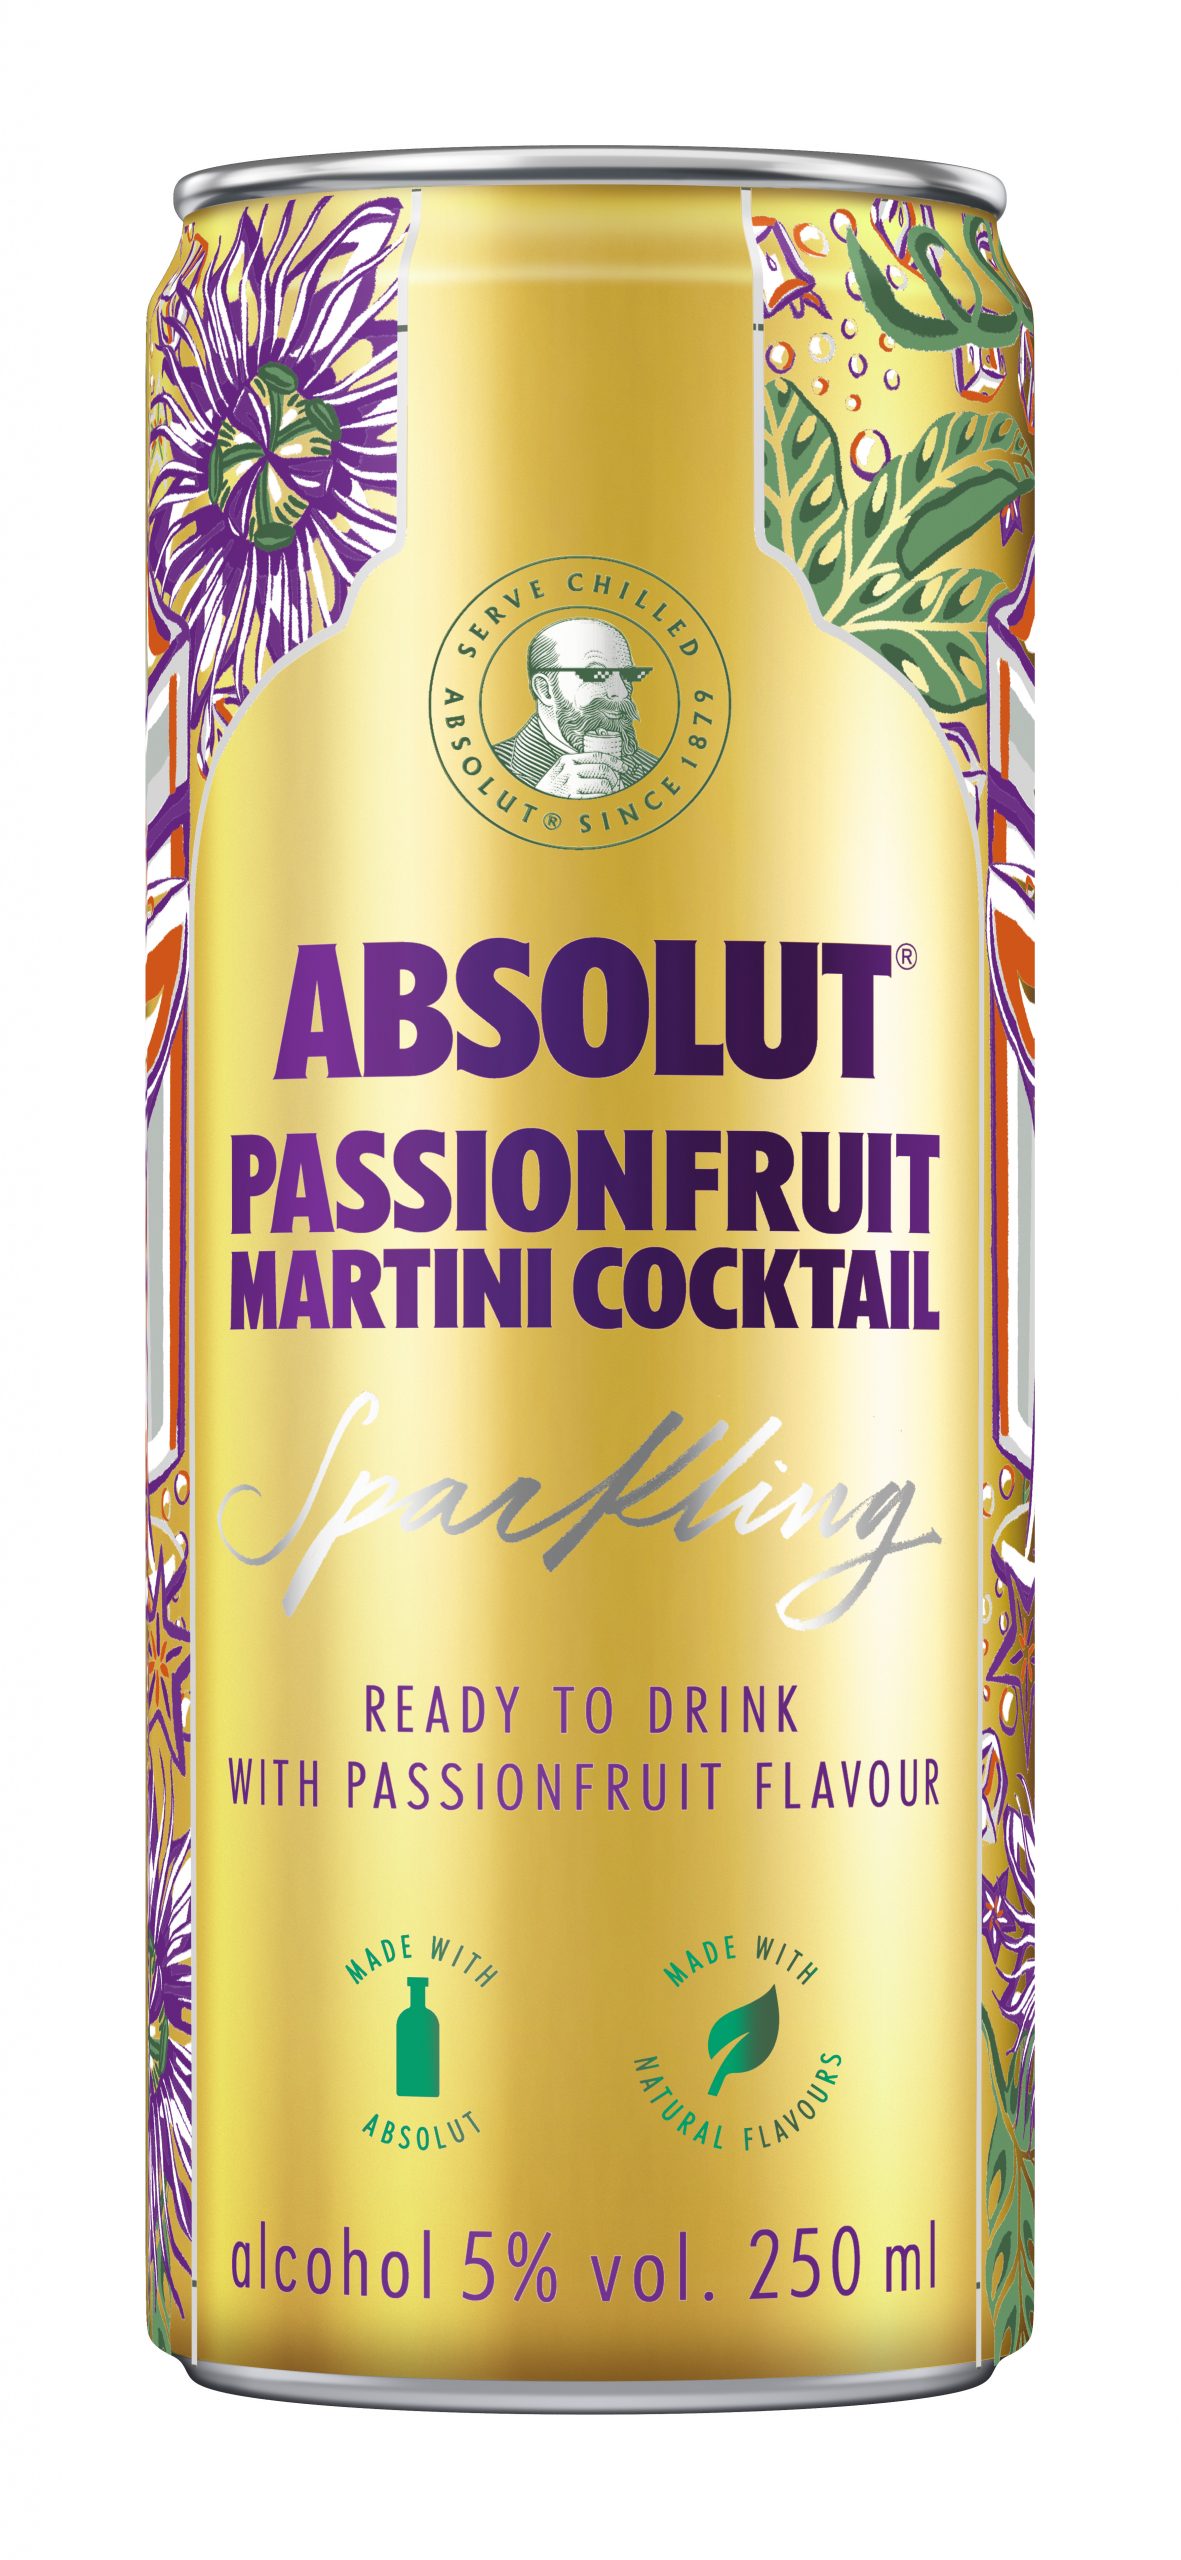 Absolut new Passionfruit Martini RTD for at home and on-the-go